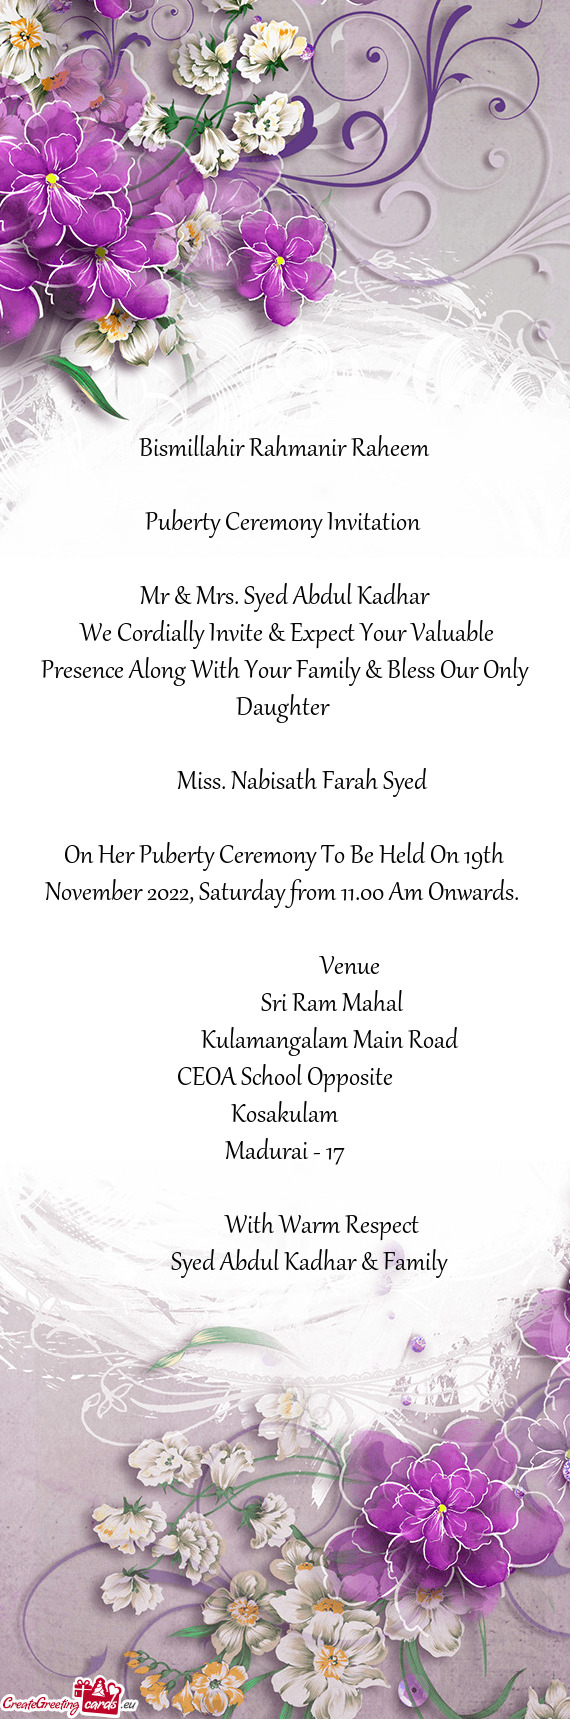 We Cordially Invite & Expect Your Valuable Presence Along With Your Family & Bless Our Only Daughte